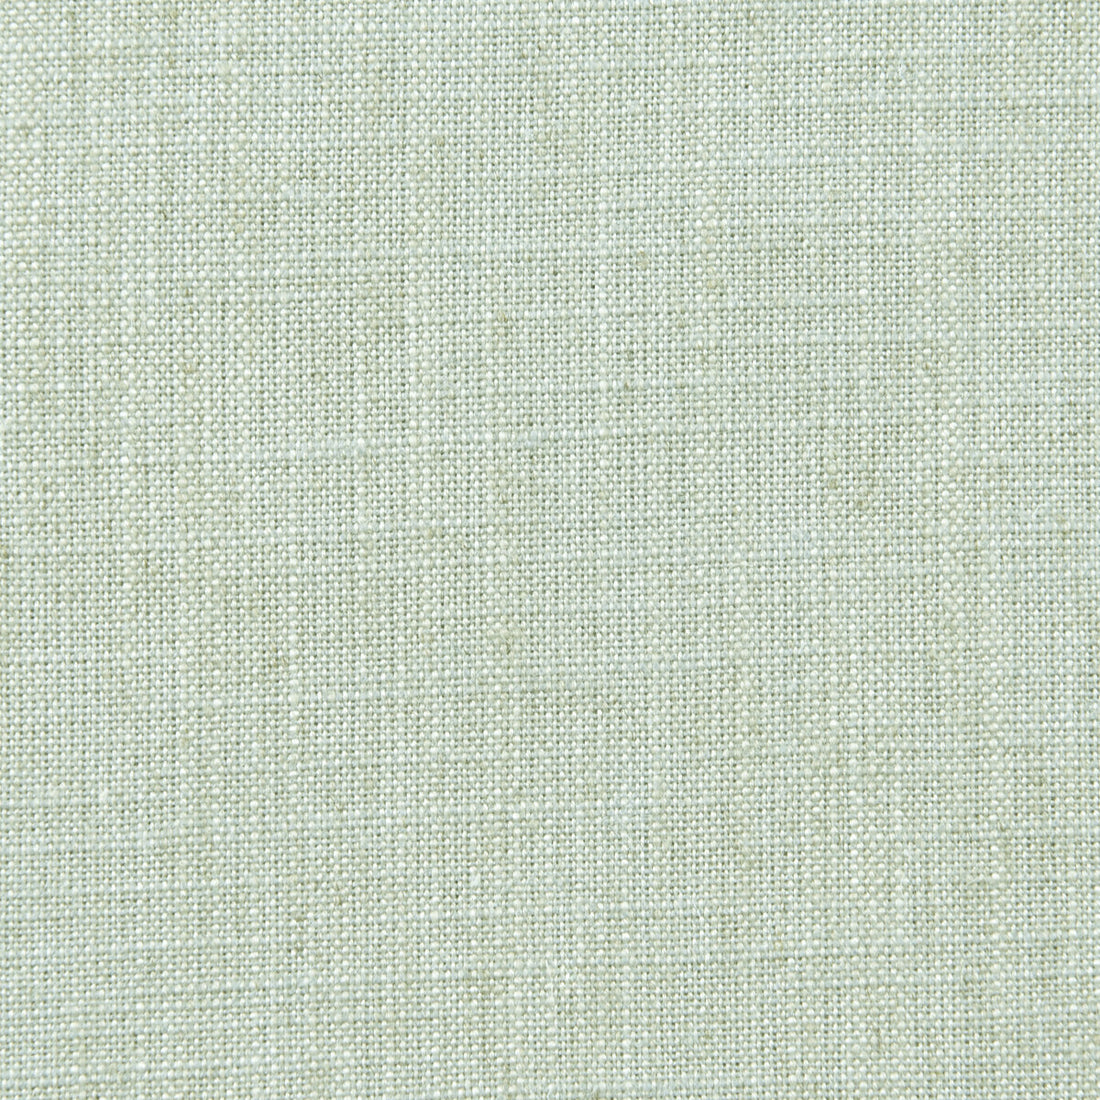 Biarritz fabric in mint color - pattern F0965/29.CAC.0 - by Clarke And Clarke in the Clarke &amp; Clarke Biarritz collection